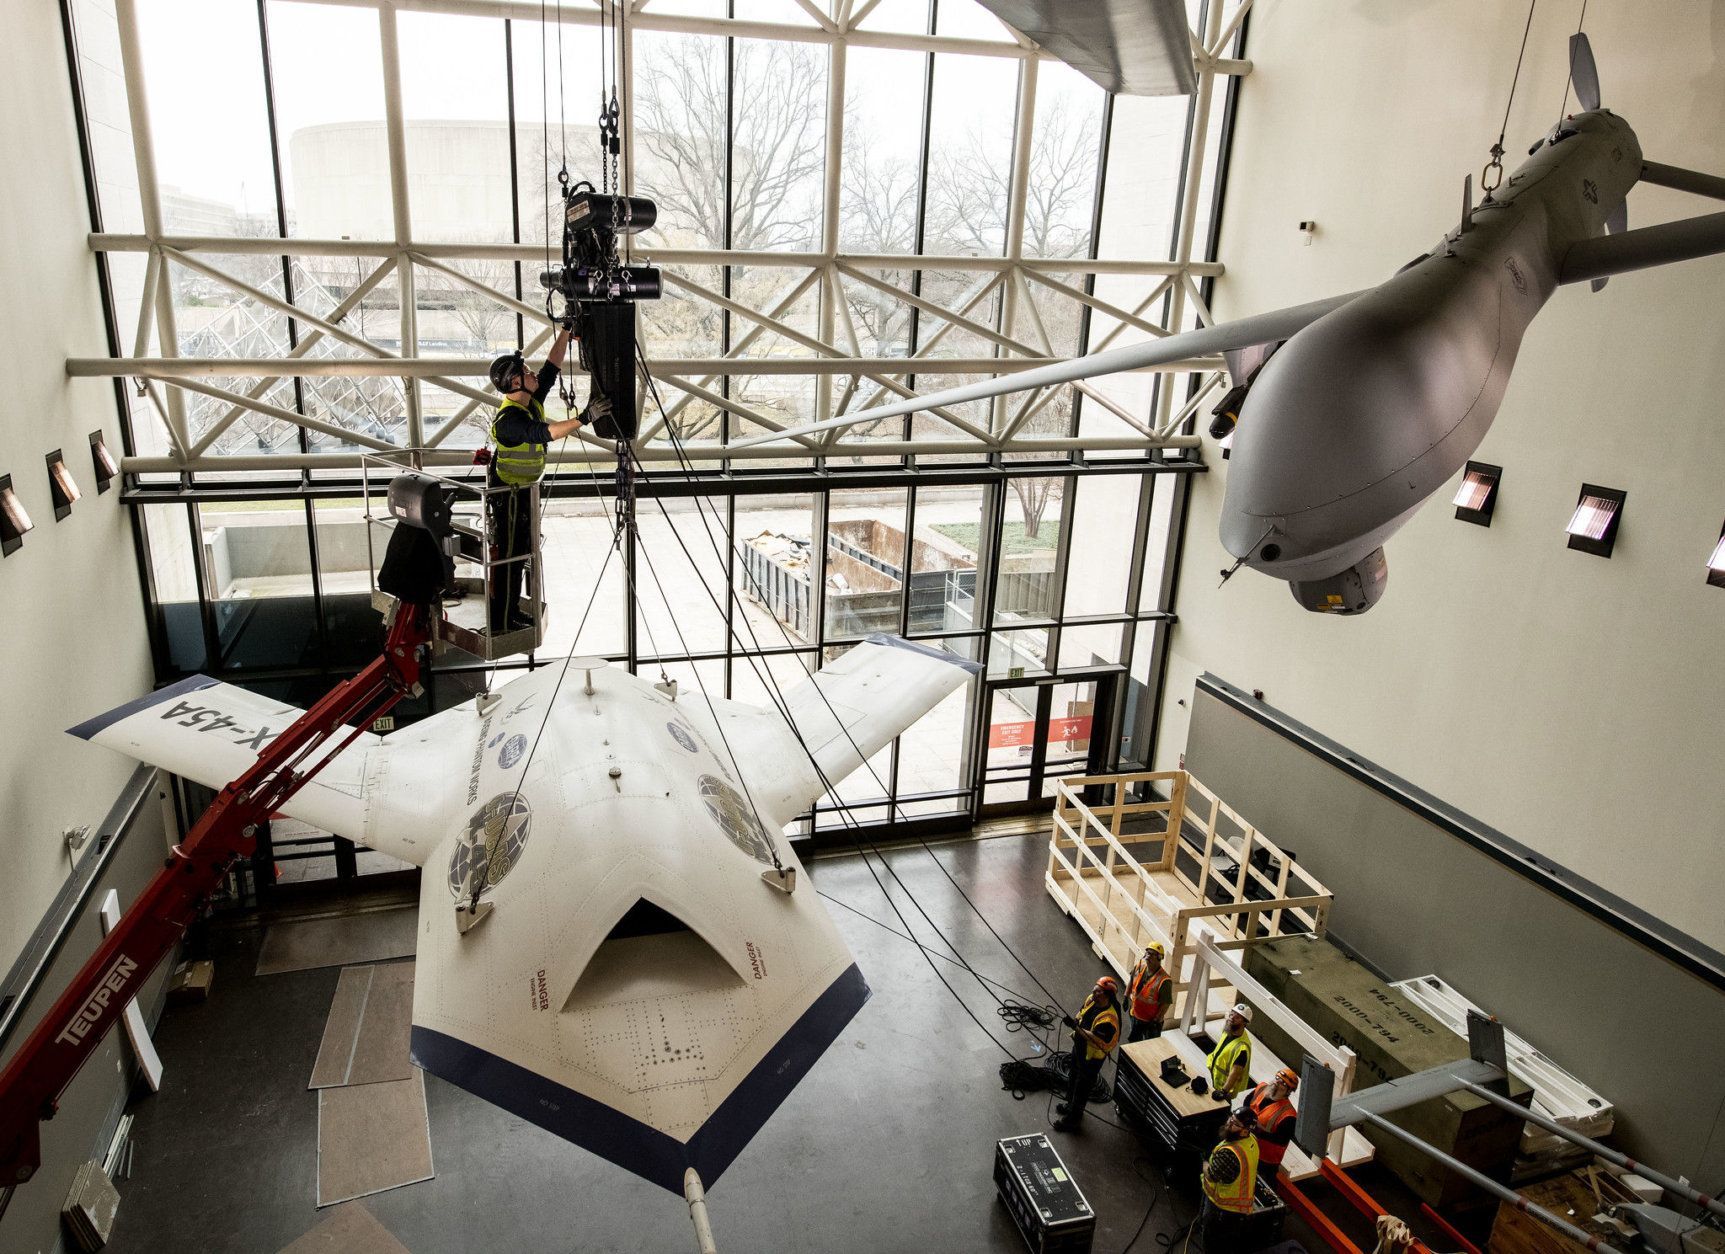 Contractors from iWeiss work to rig the X-45A drone for lowering in the Military Unmanned Aerial Vehicles (UAV) Gallery of the National Air and Space Museum in Washington, DC, February 22, 2019. (Smithsonian photo by Jim Preston)  Material is subject to Smithsonian Terms of Use. Should you wish to use National Air and Space material in any medium, please submit an Application for Permission to Reproduce NASM Material, available at:  https://airandspace.si.edu/permissions